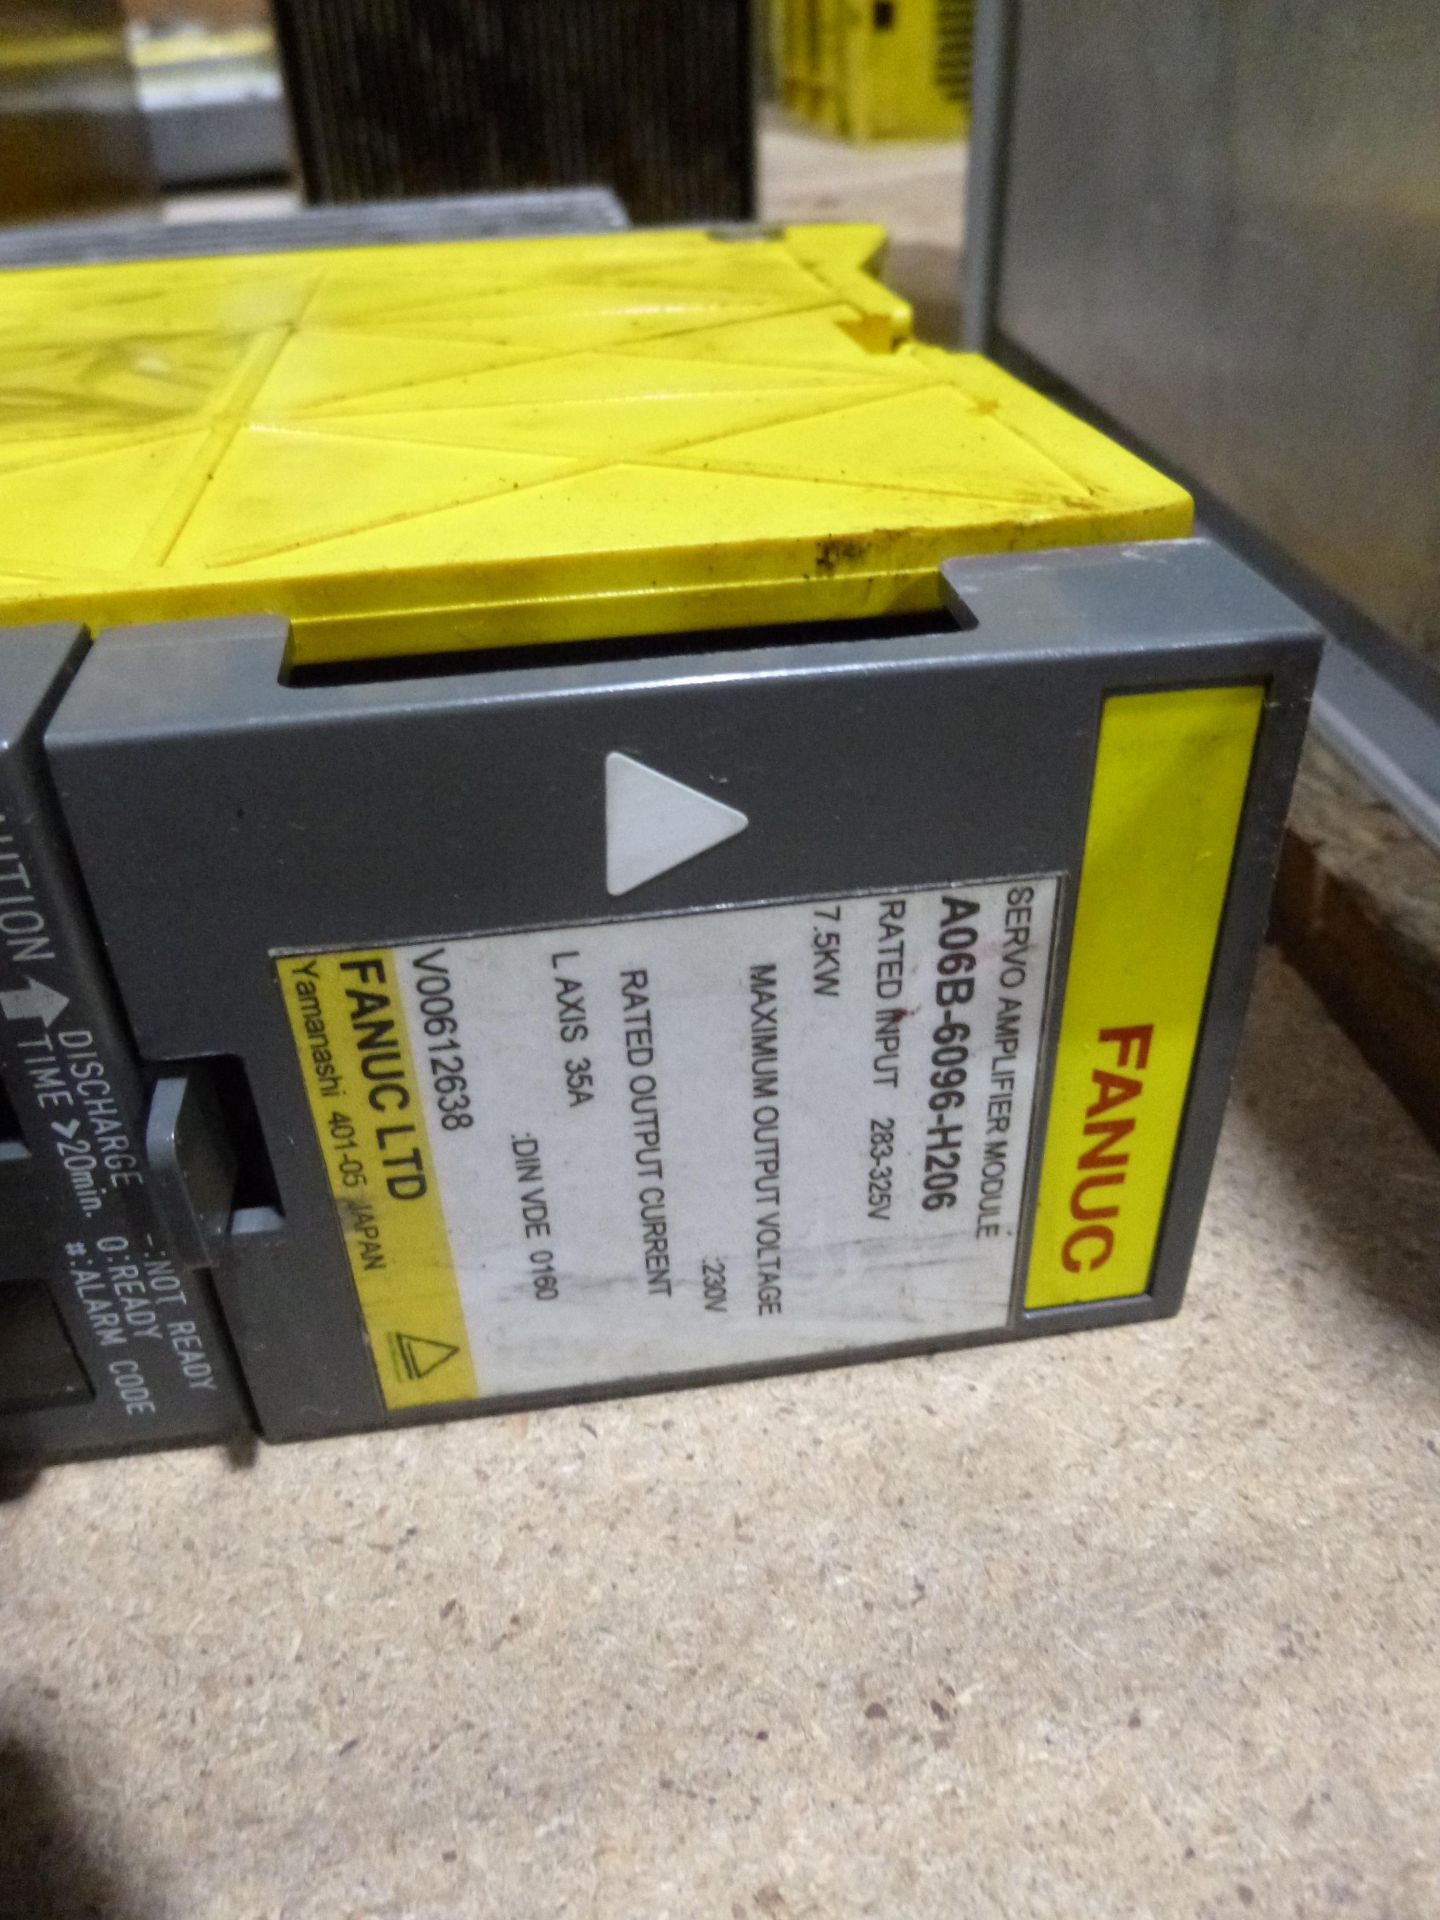 Fanuc power supply module model A06B-6087-H126, as always with Brolyn LLC auctions, all lots can - Image 2 of 2